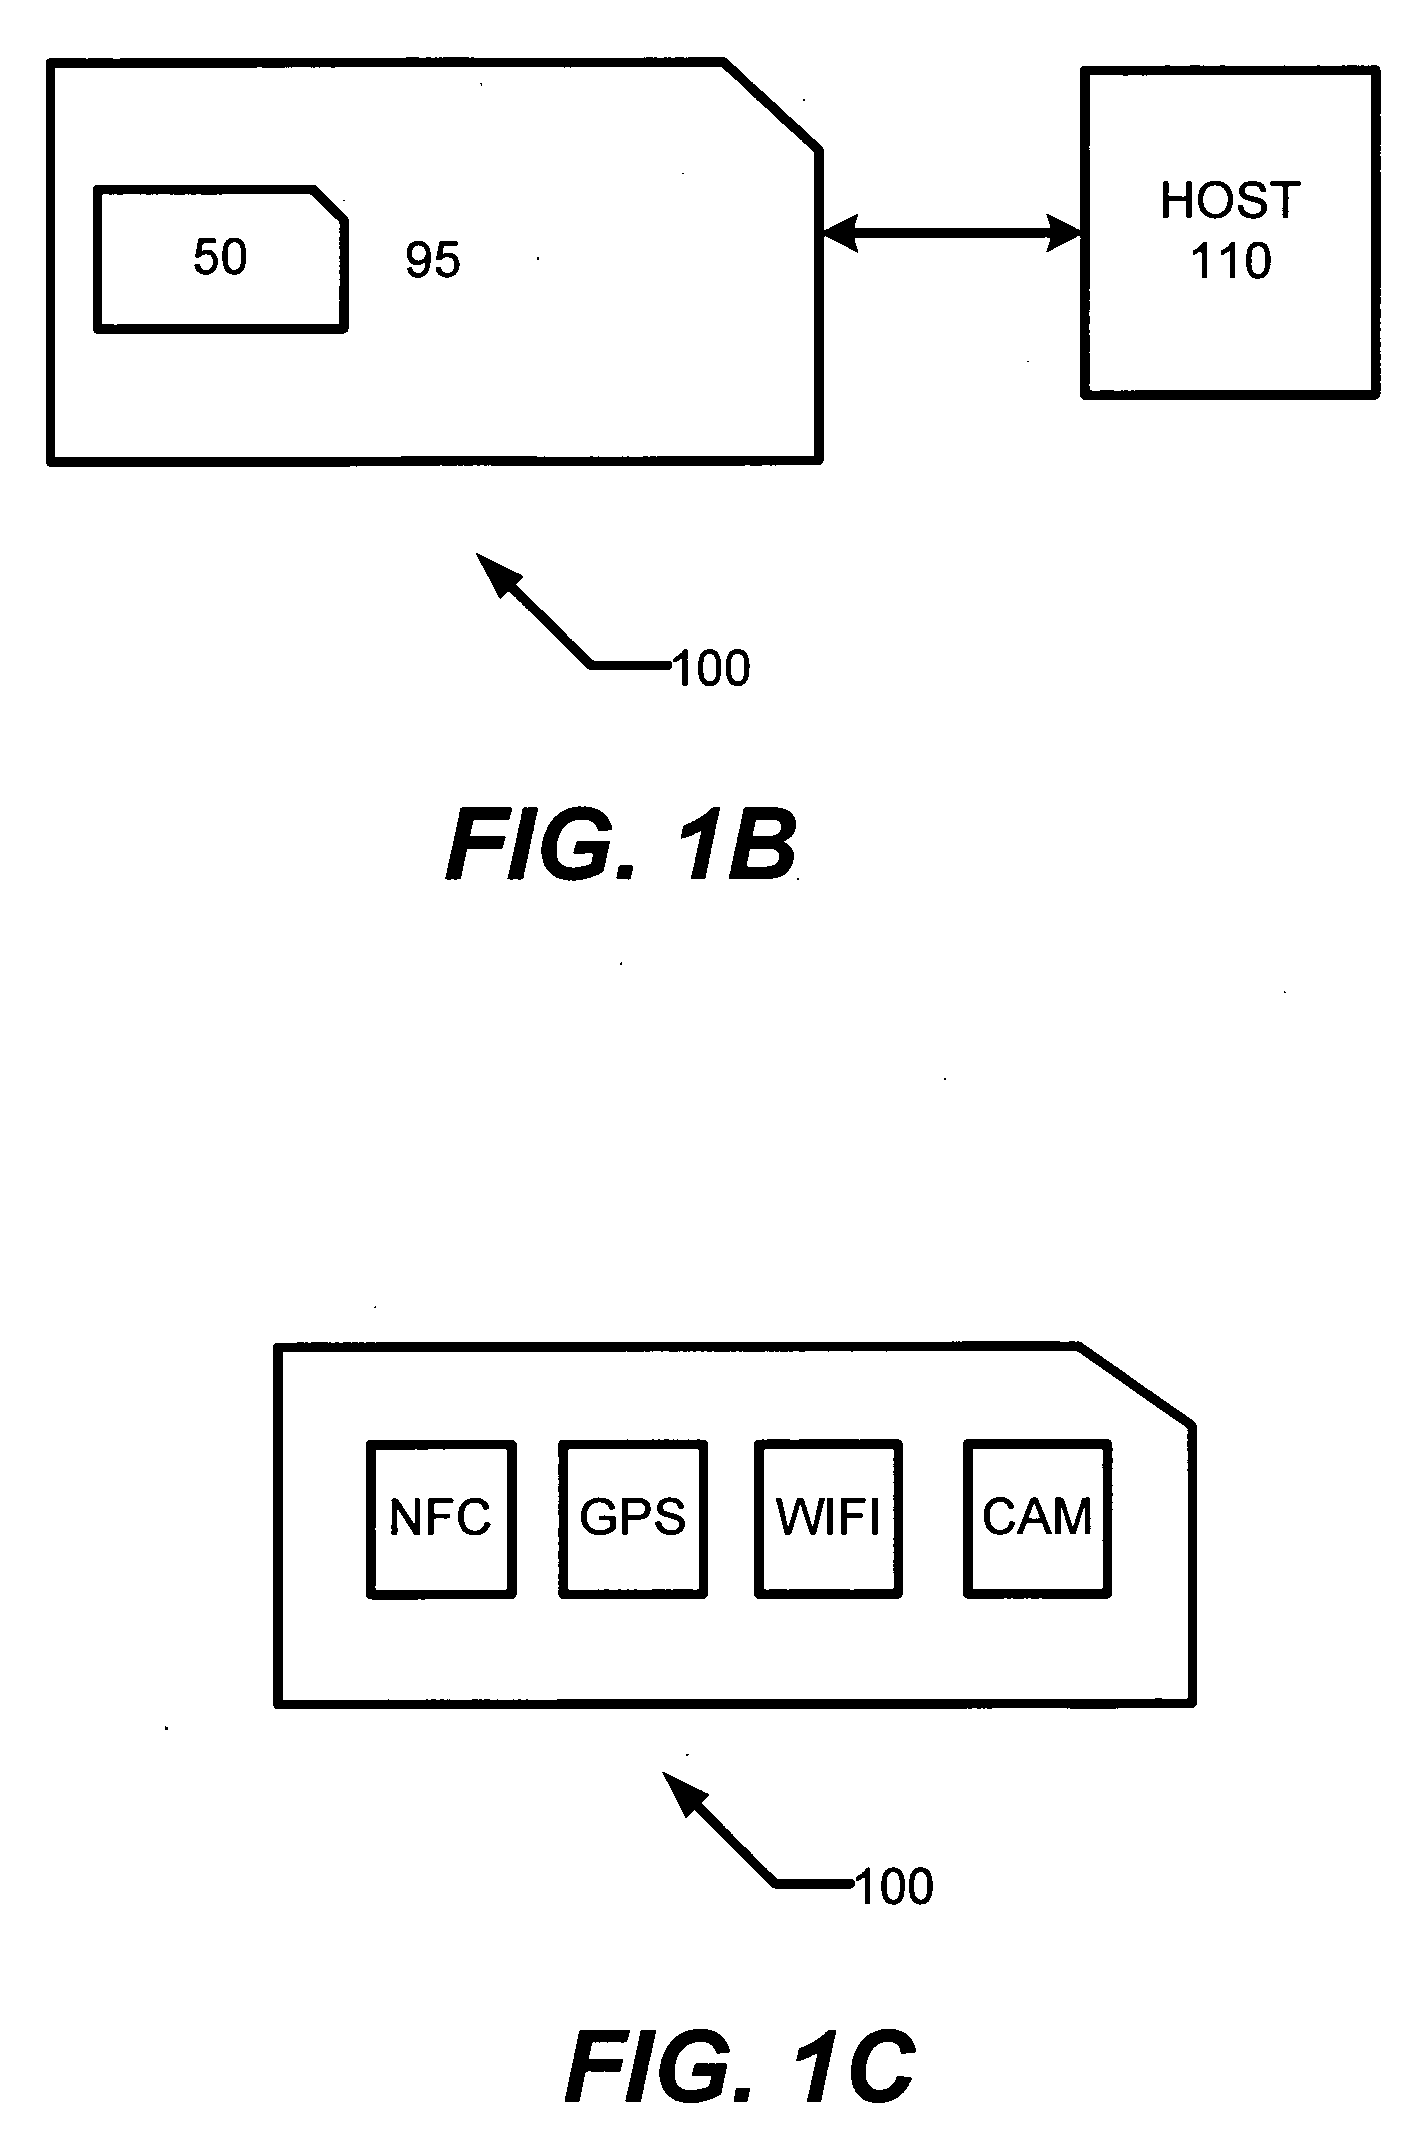 Methods used in a nested memory system with near field communications capability